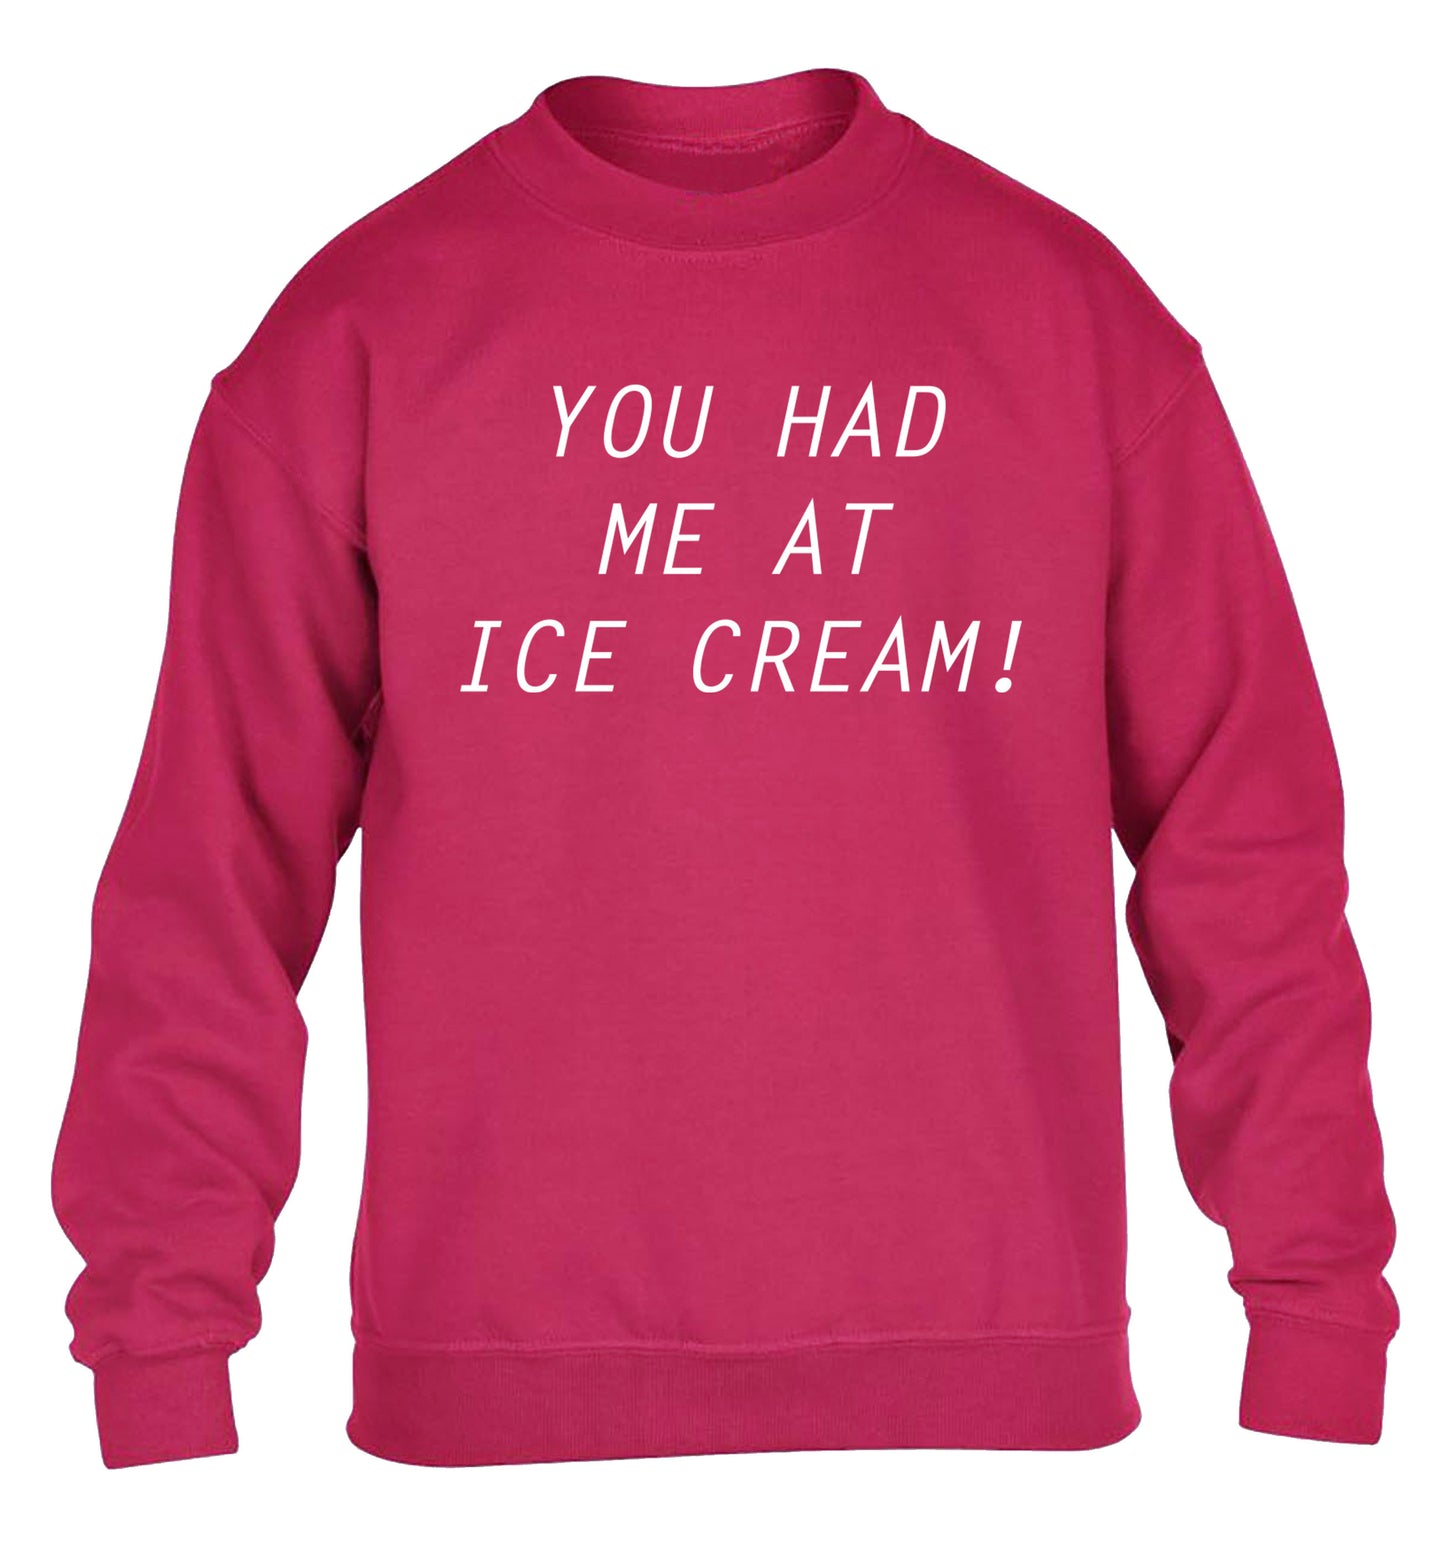 You had me at ice cream children's pink sweater 12-14 Years